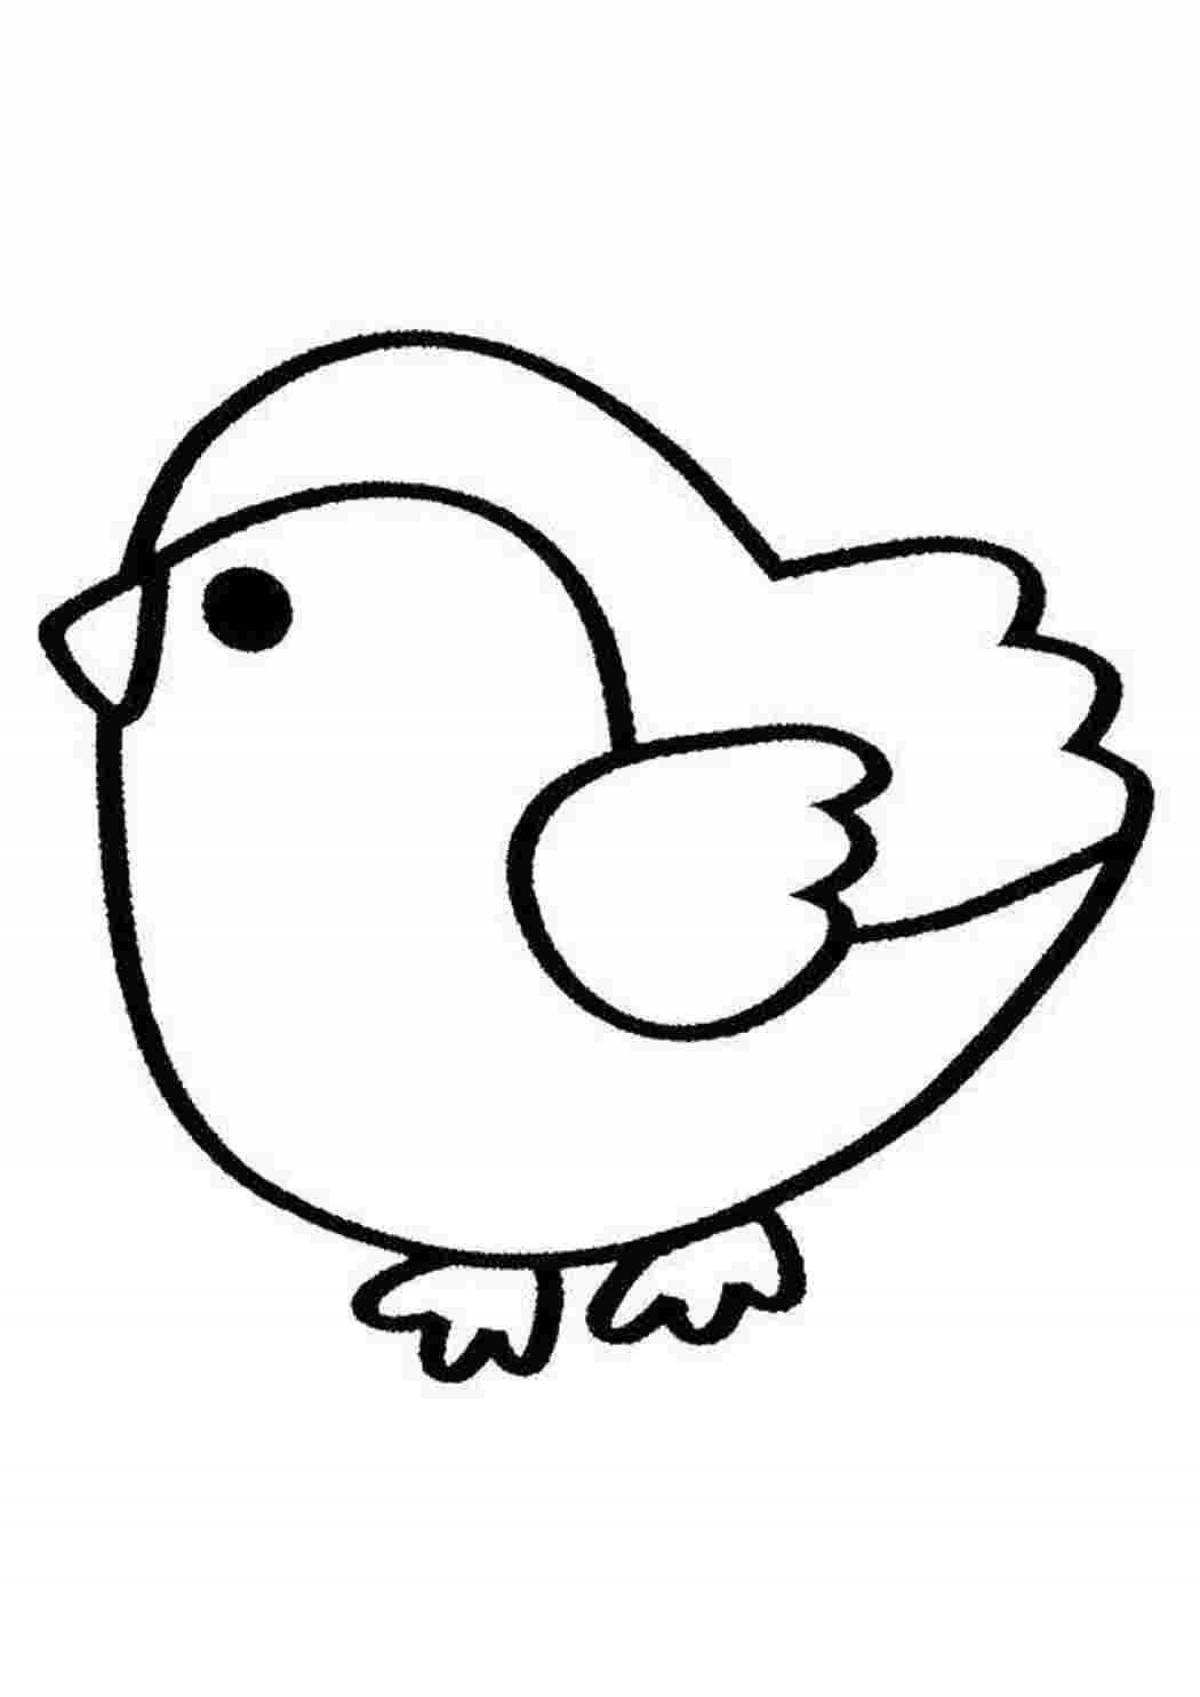 Adorable bird coloring page for beginners